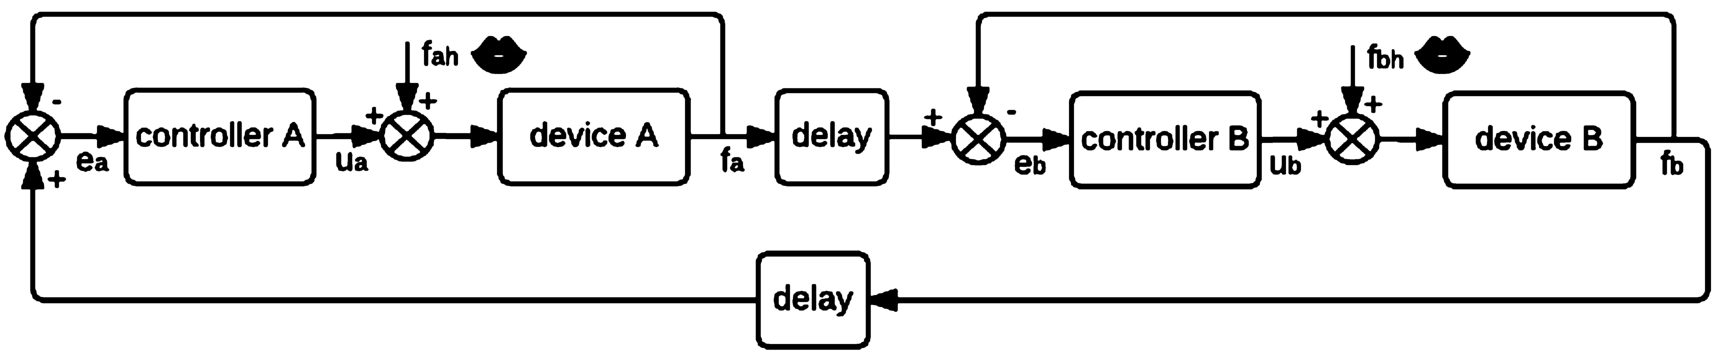 Control block diagram of the bilateral force feedback controller of the system.